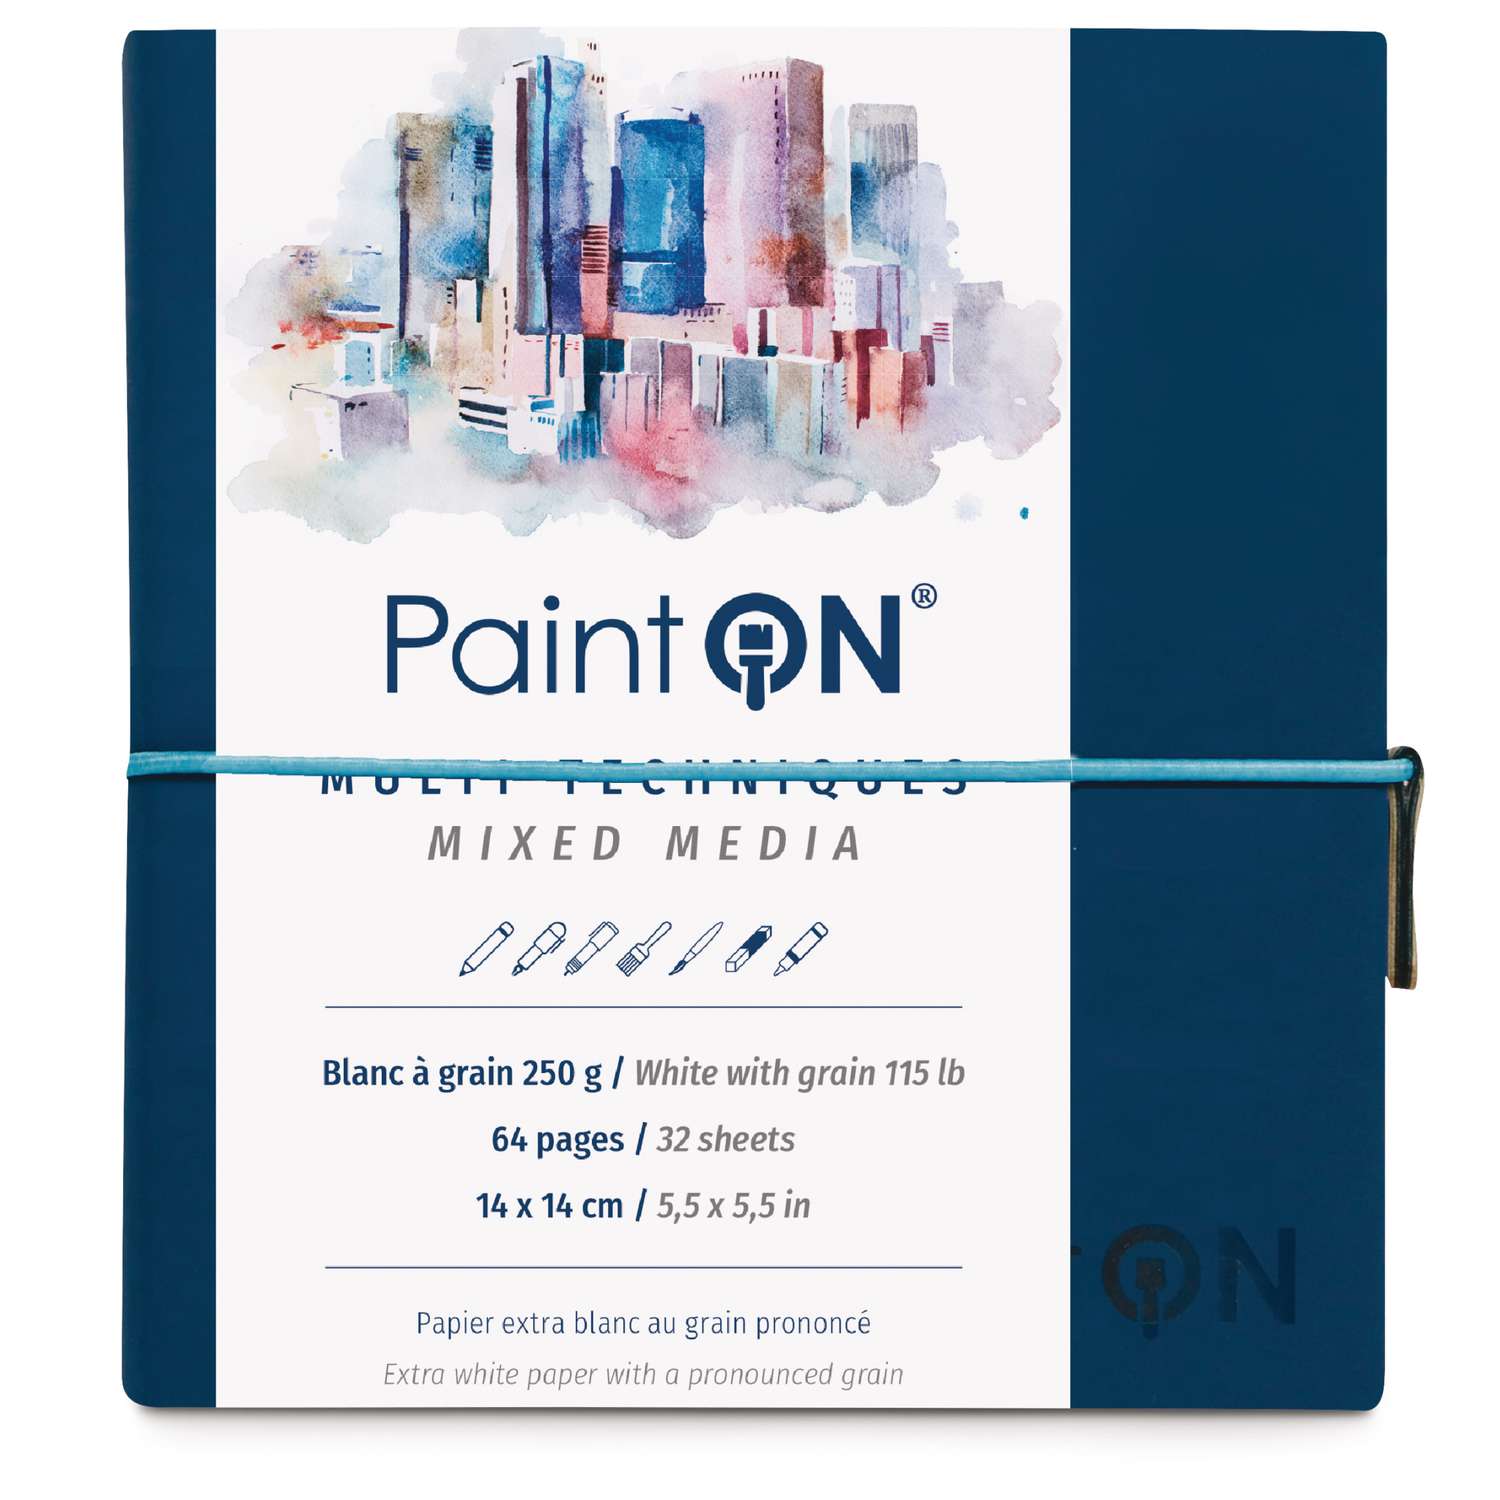 Carnet Paint On - 19x19cm - Clairefontaine - Creastore